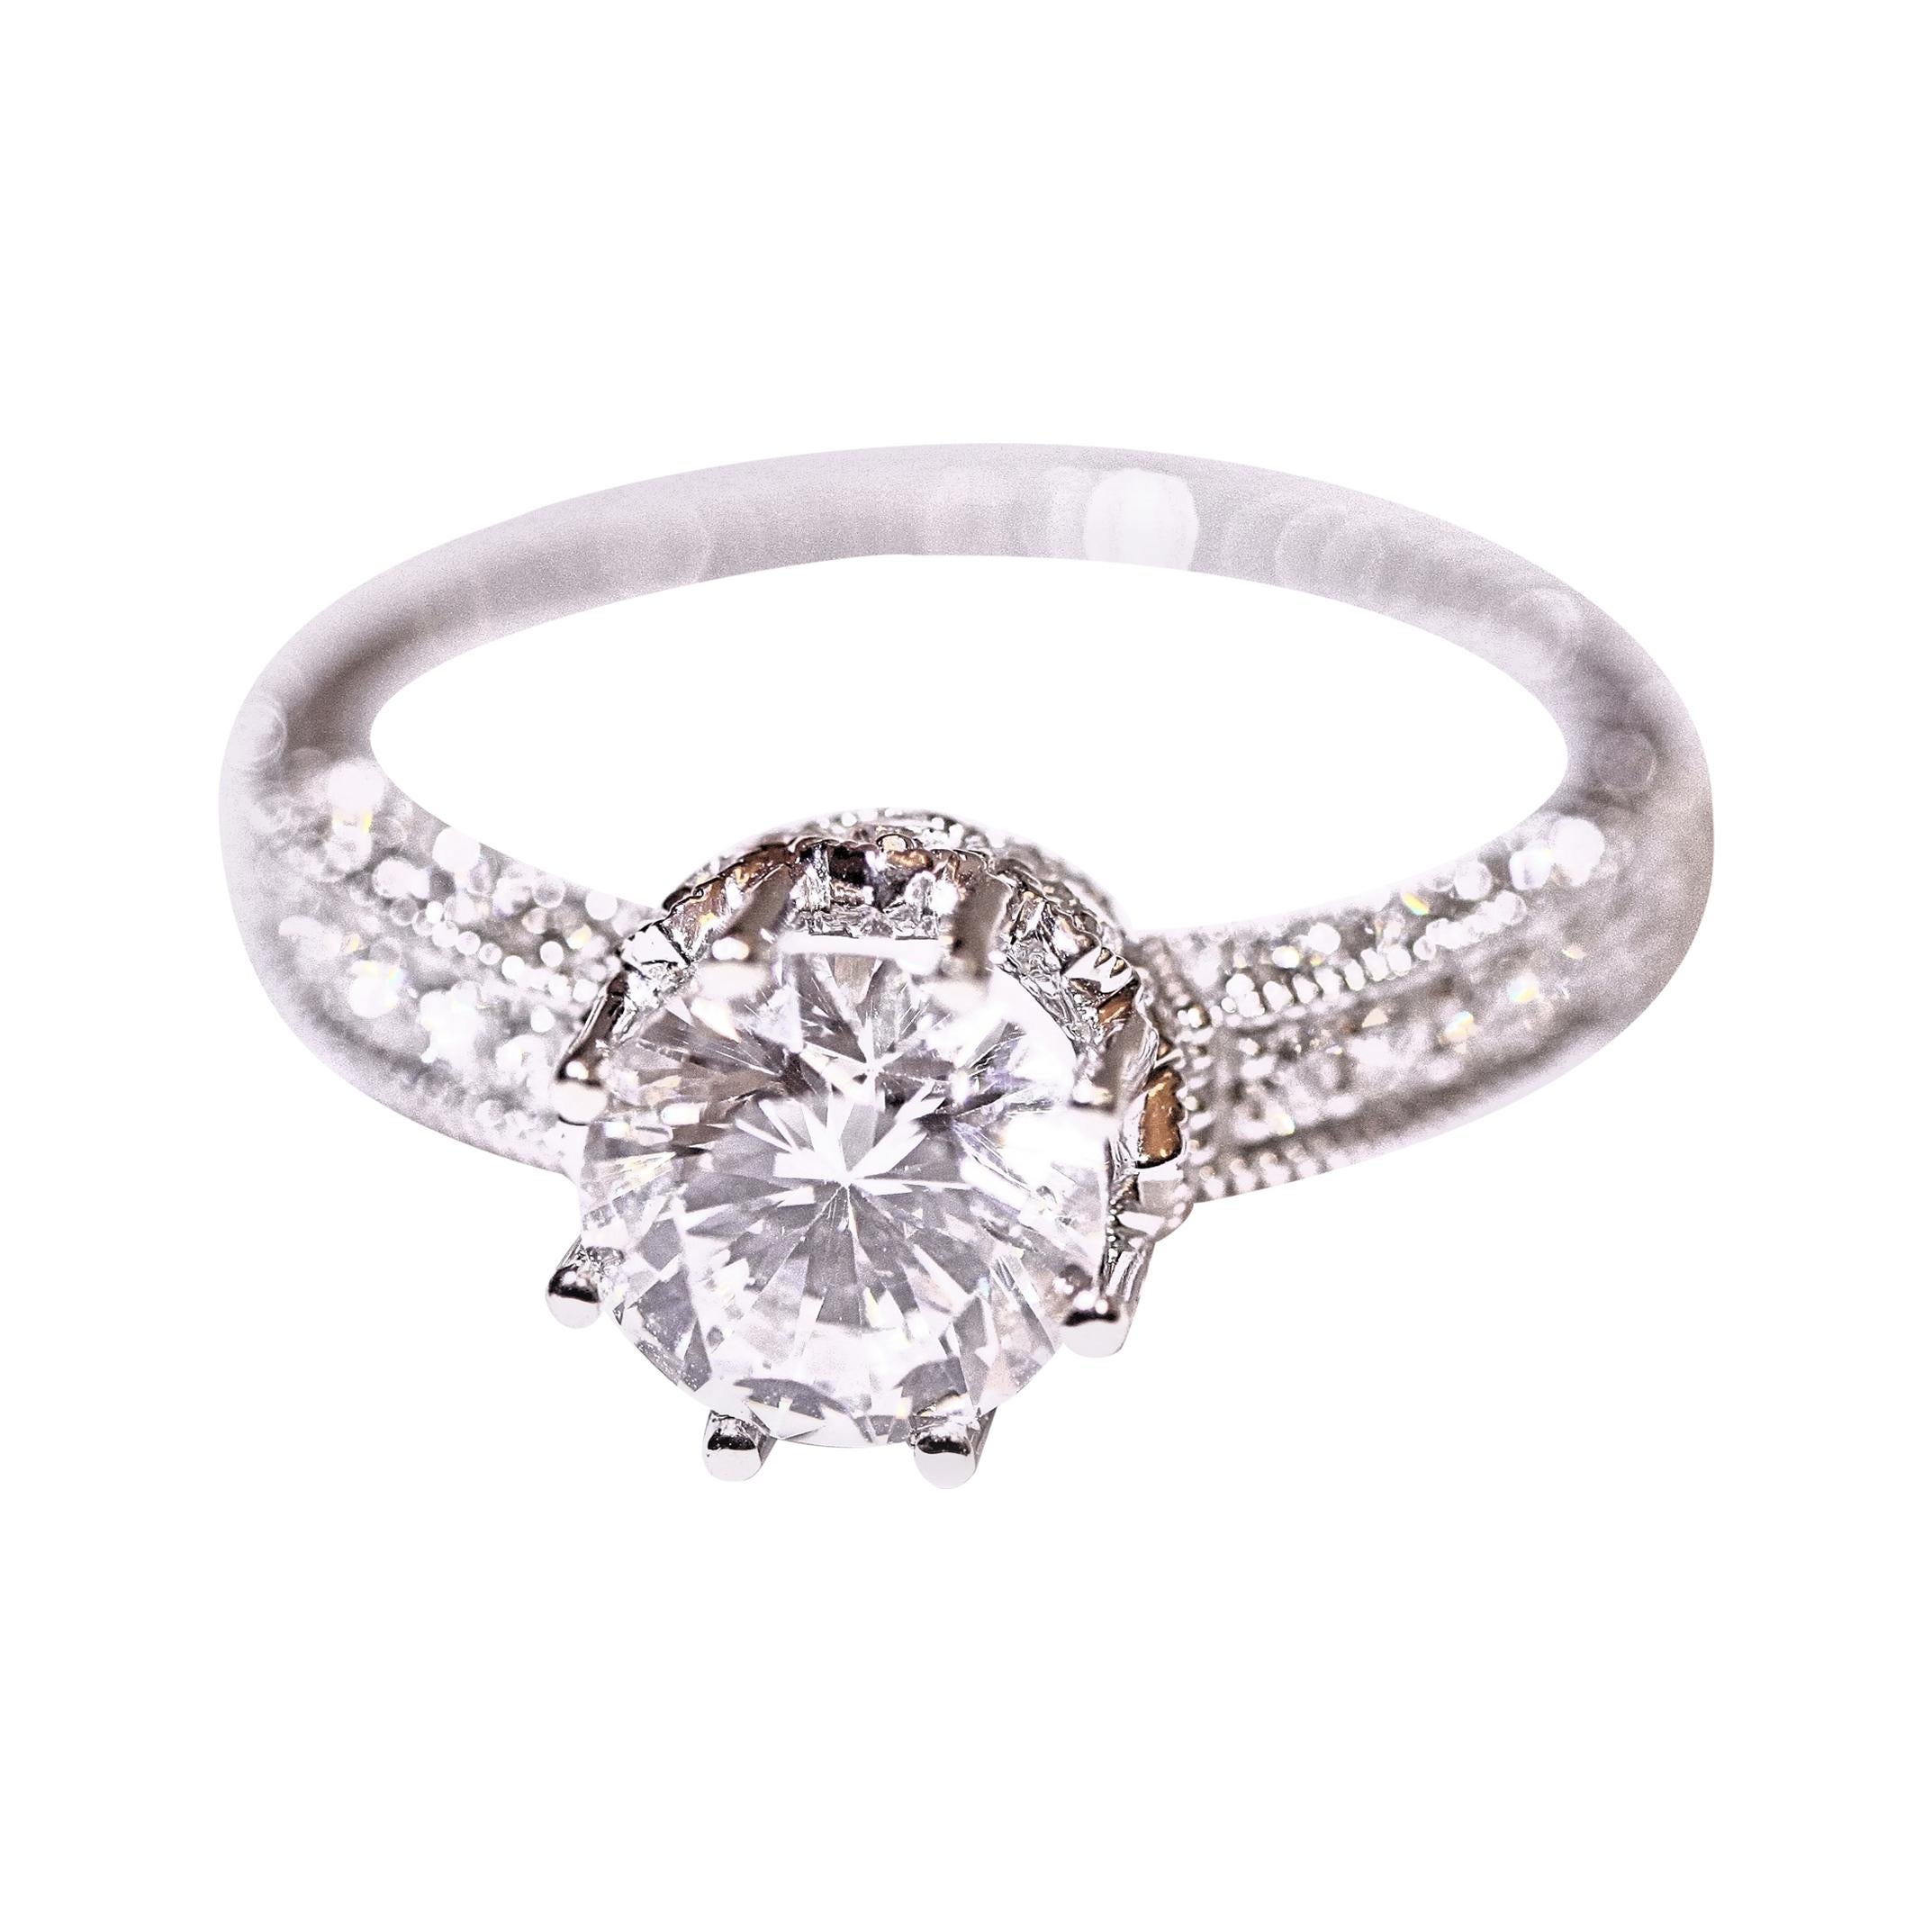 Diamond Engagement Ring Solitaire Ring 14 Karat White Gold Zirconia in Center For Sale